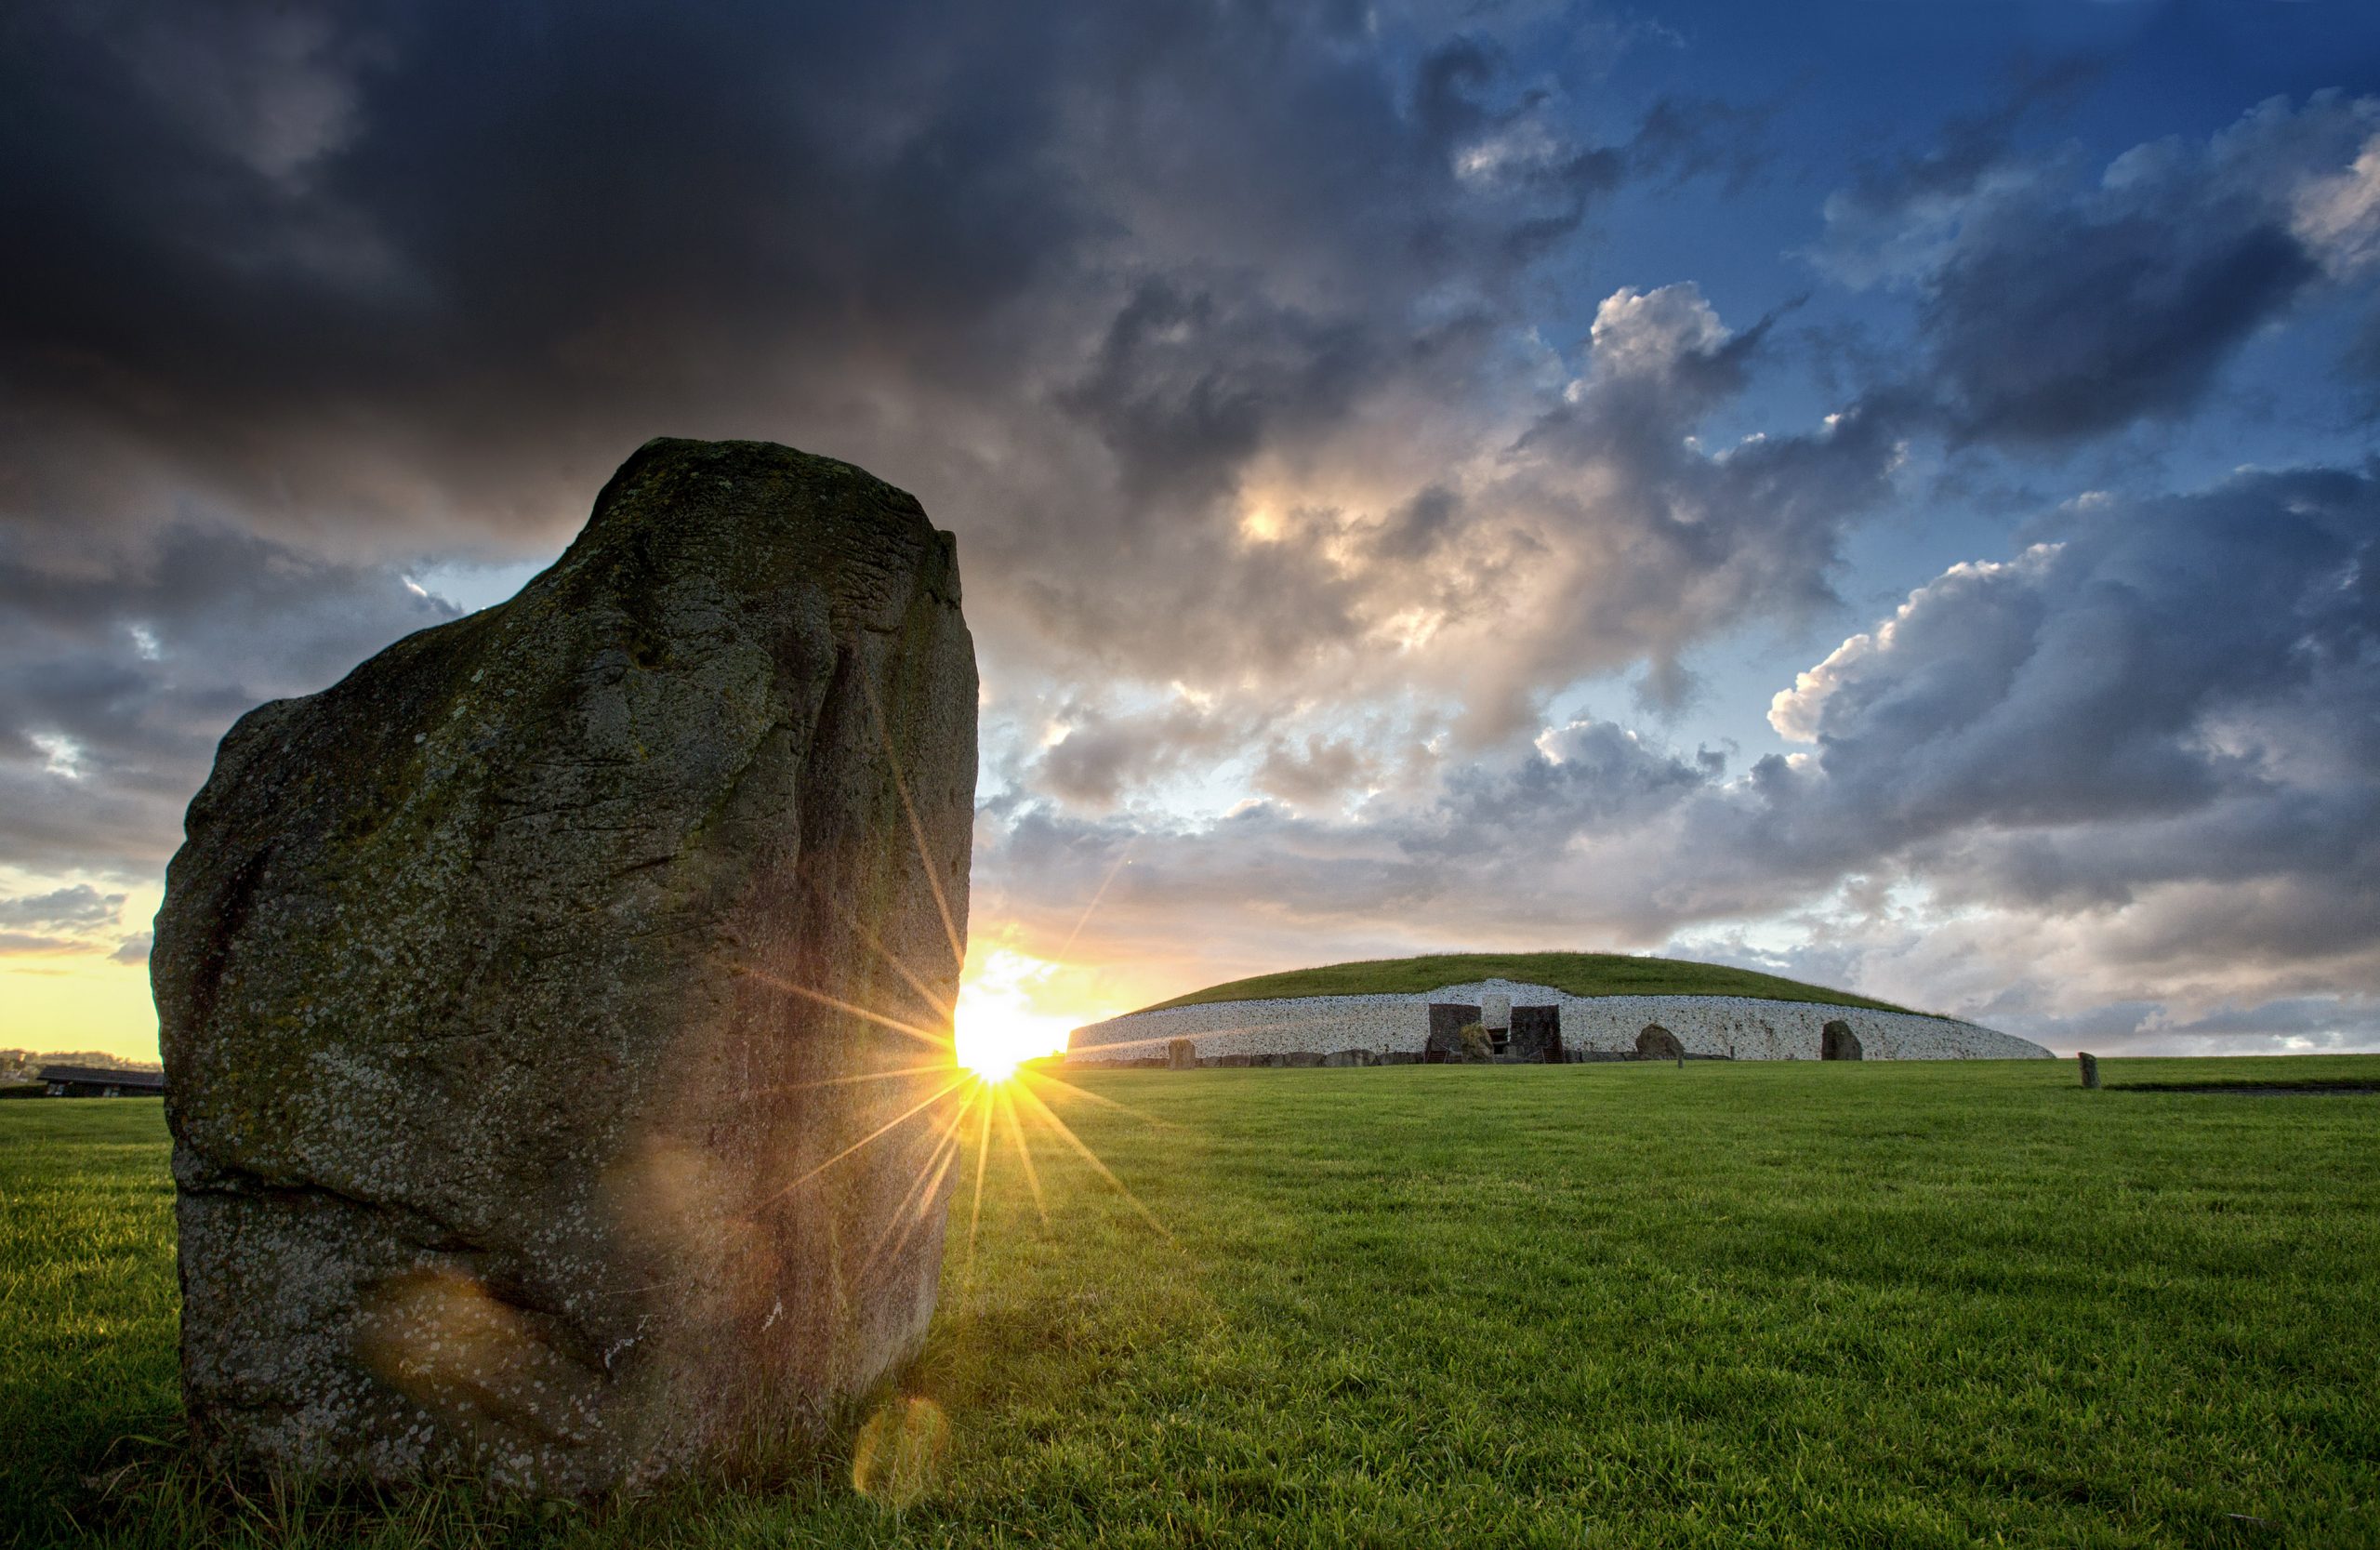 Boyne Valley Newgrange Knowth day tour from Dublin, Day Tours Unplugged